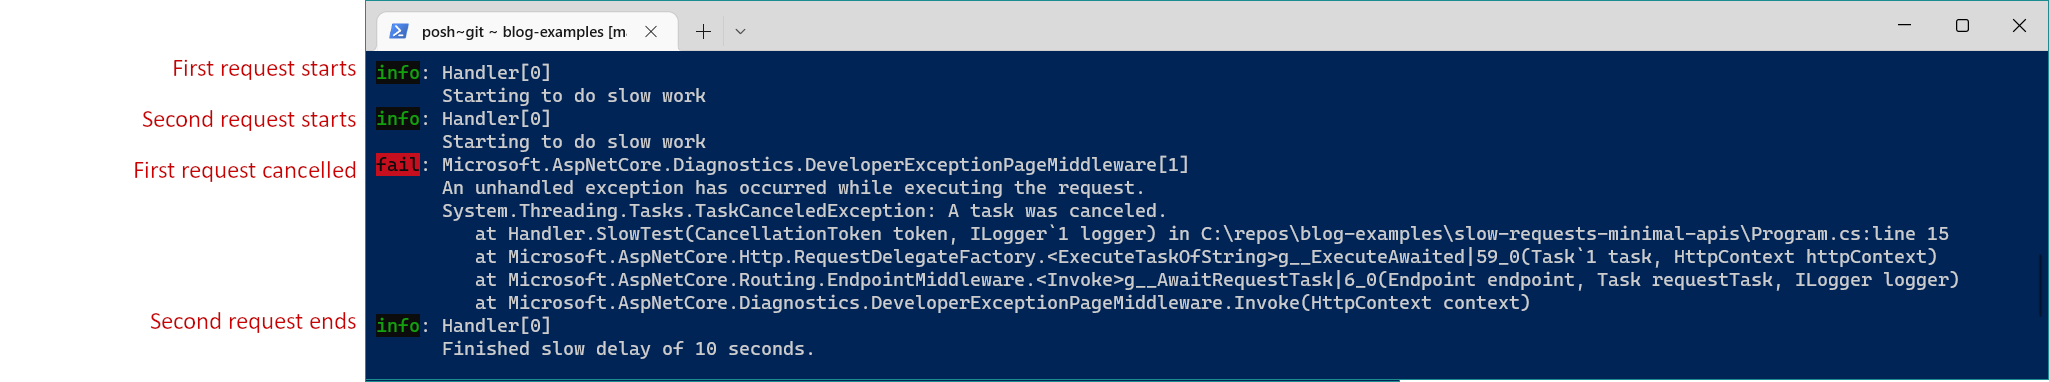 Logs throwing exception